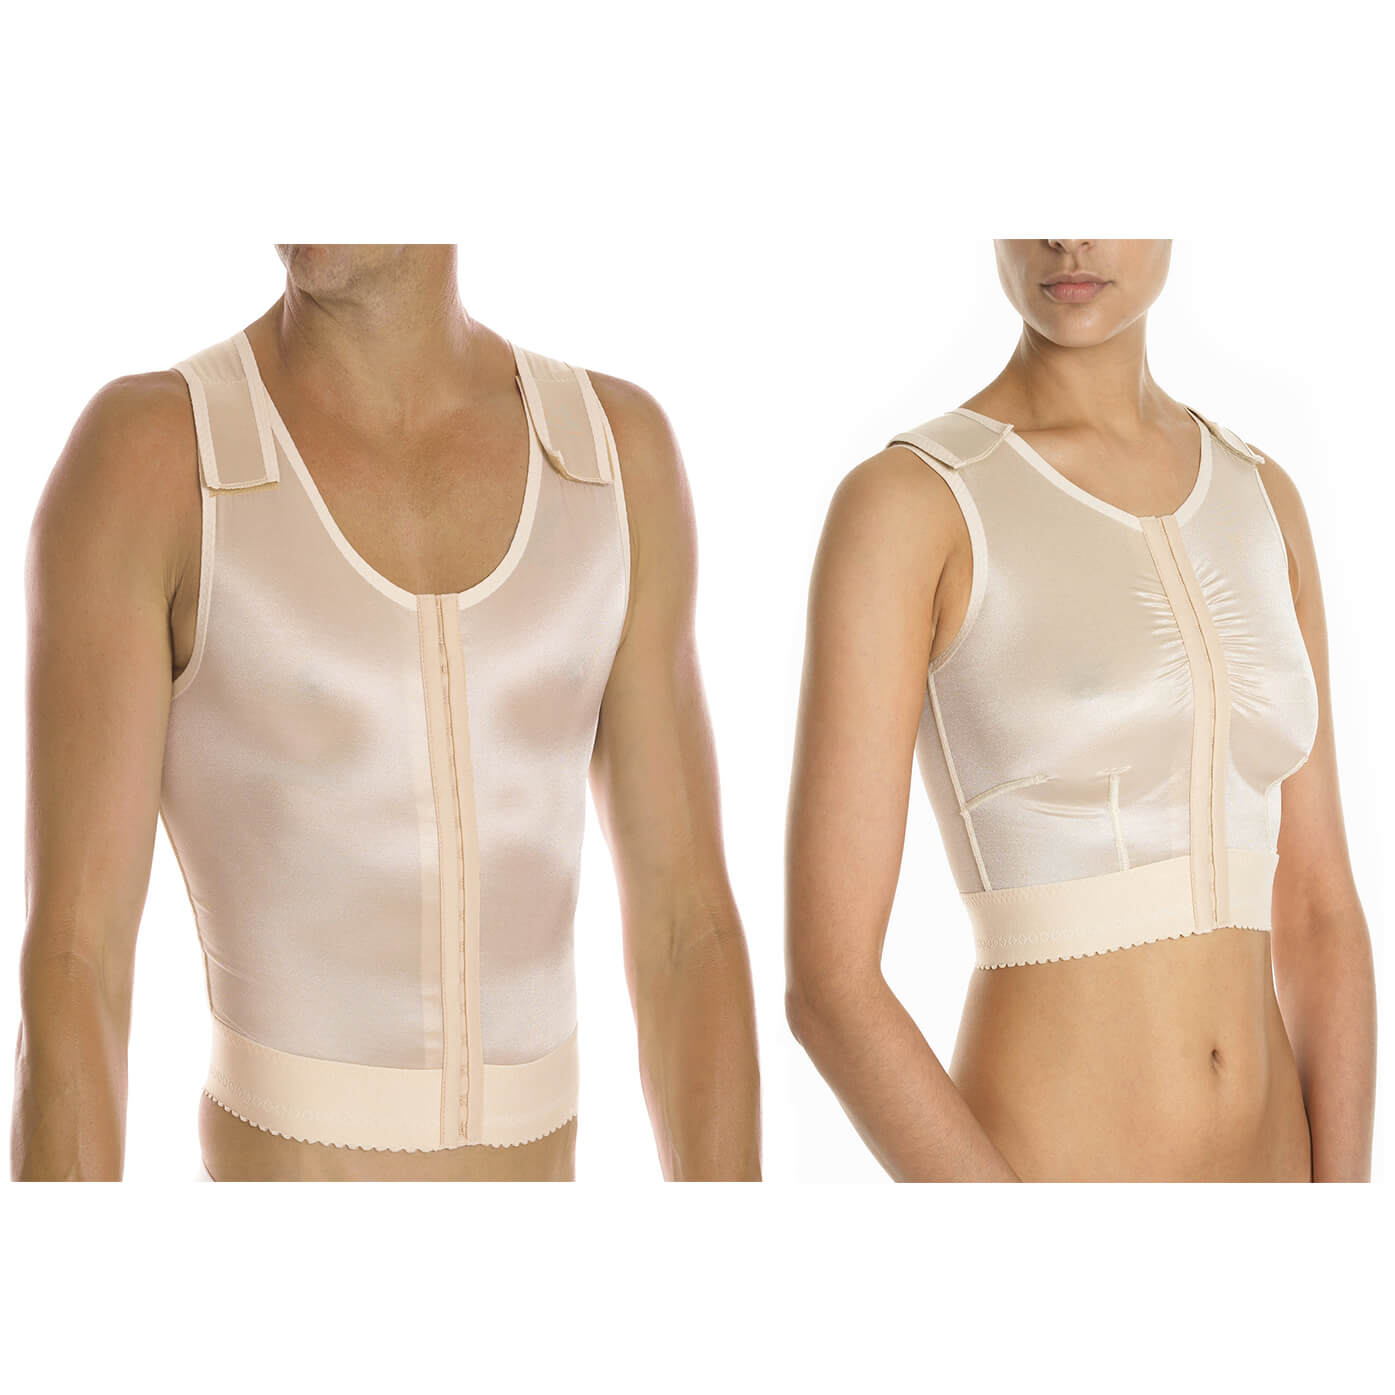 Surgical Bra with Underbust Support, Br1  Smarta Fashions - Quality  Compression Clothing